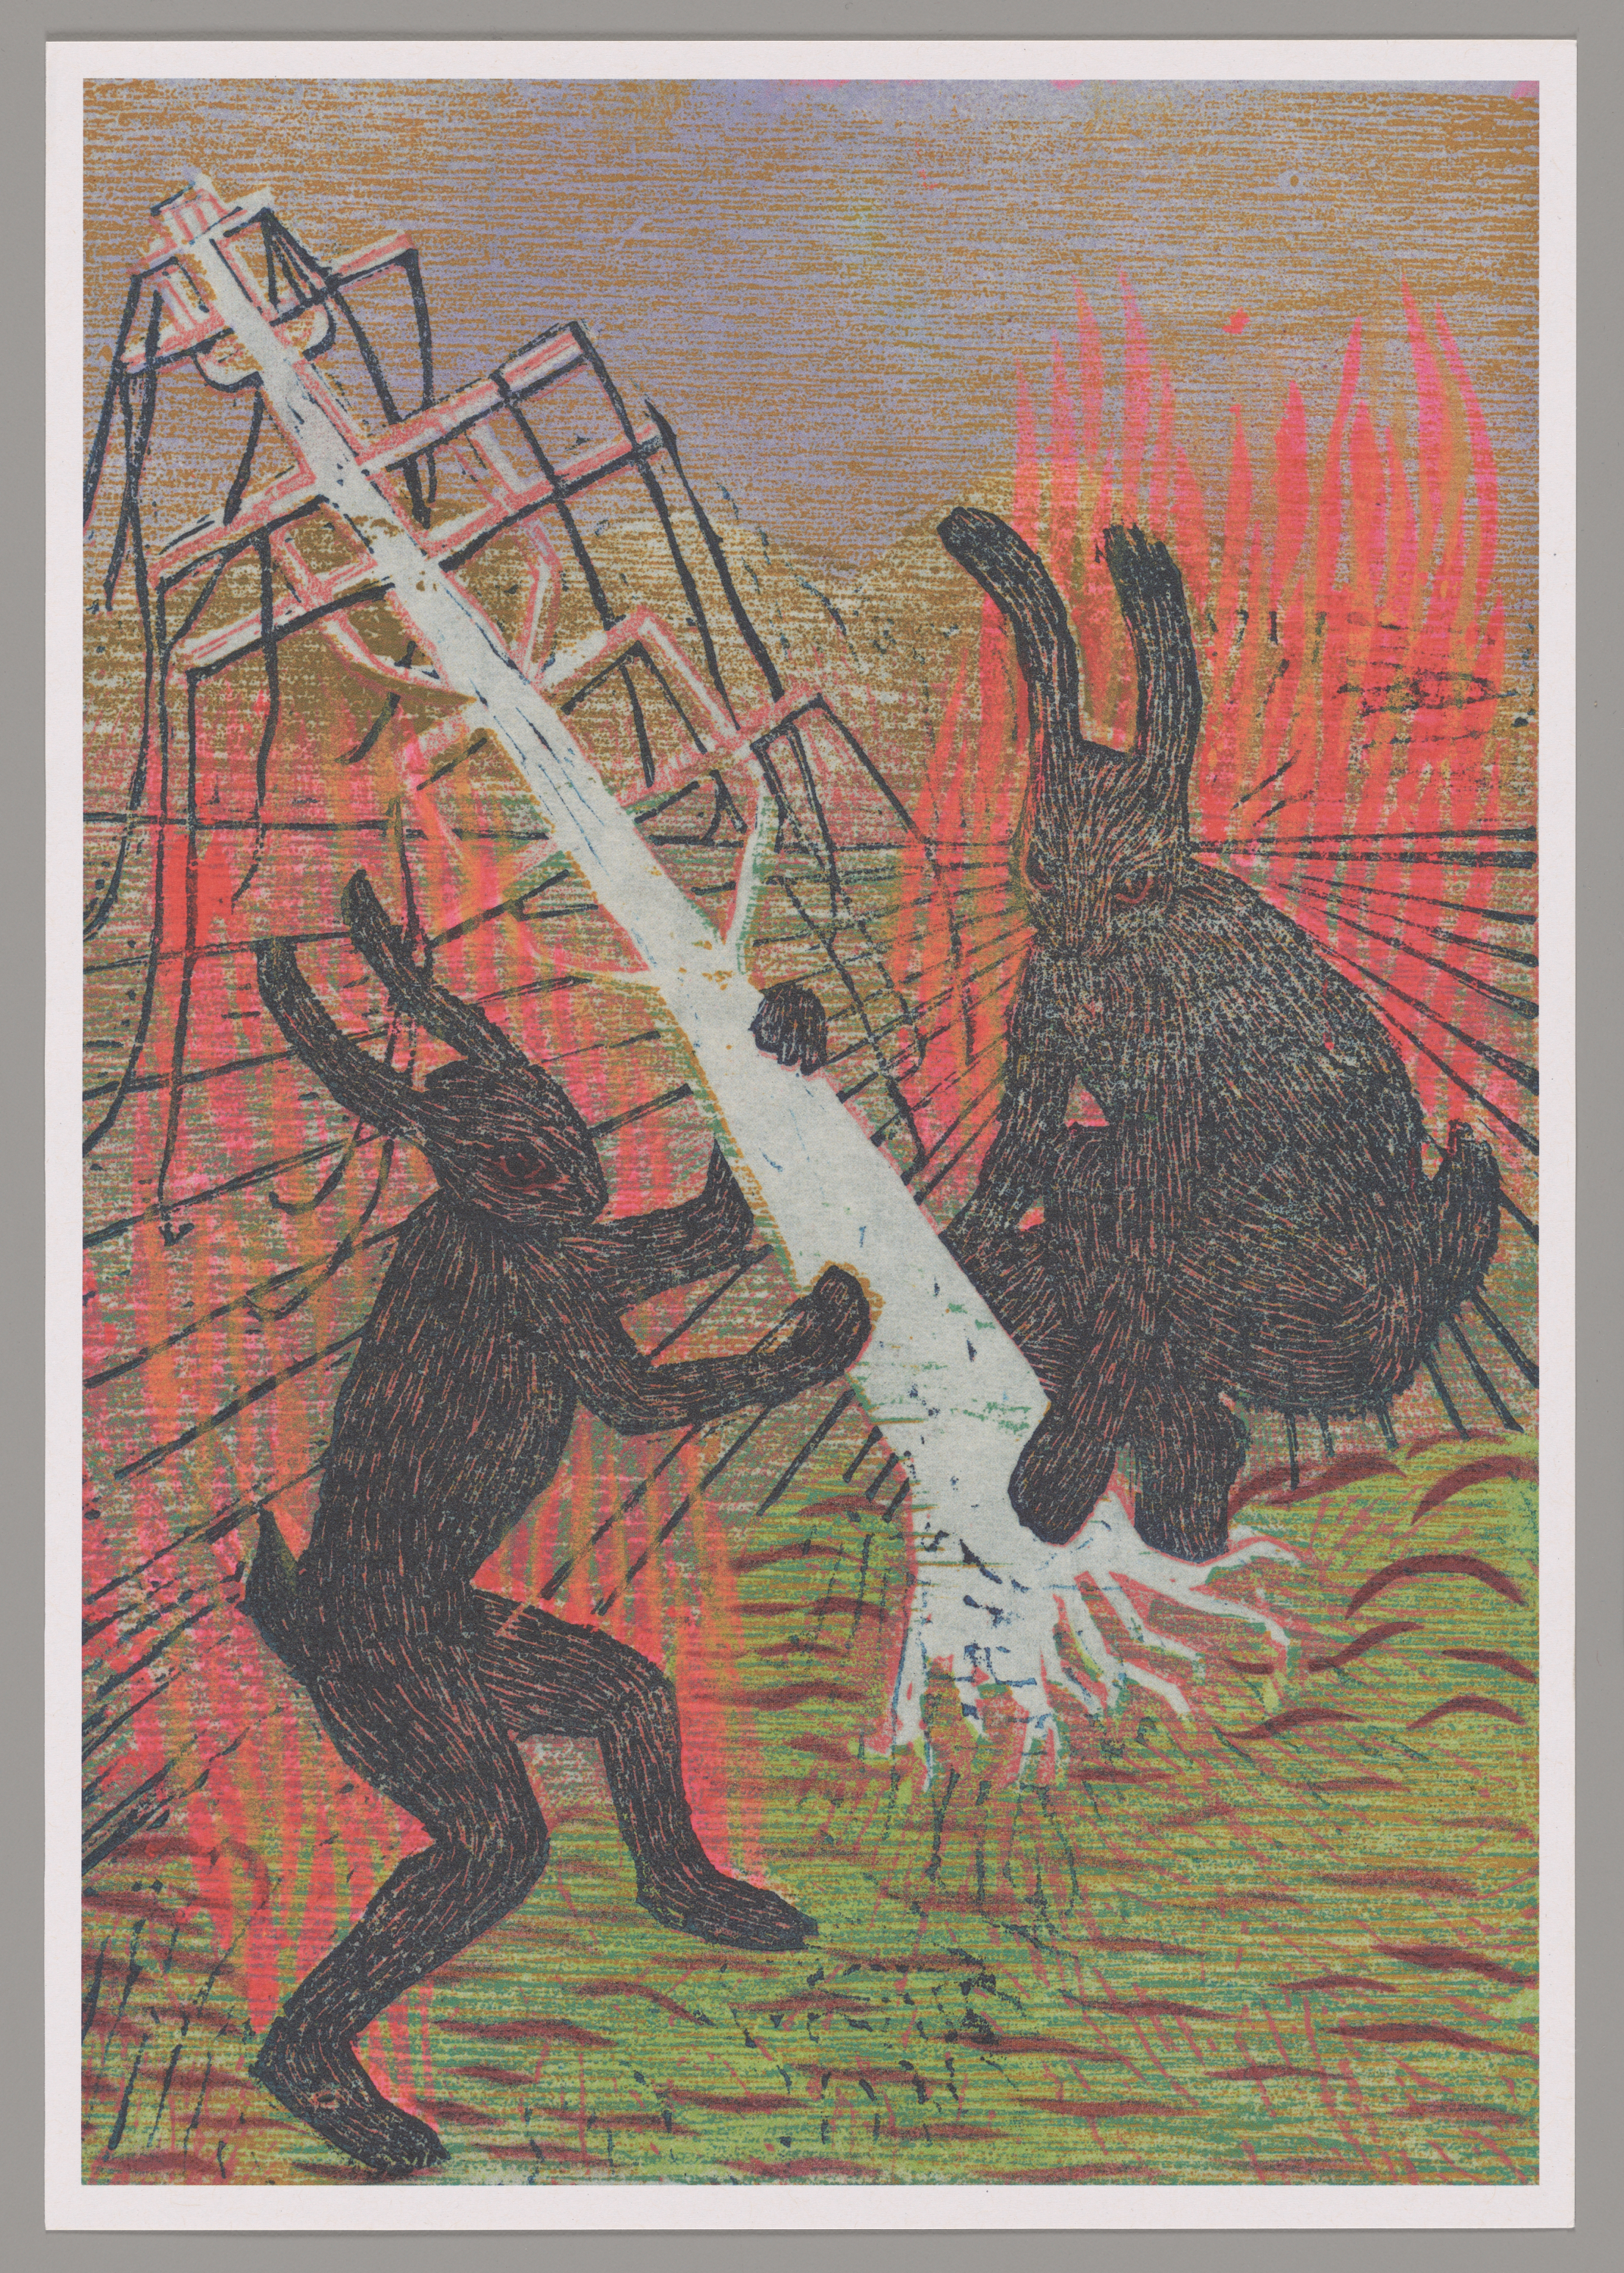 A print of two, black rabbit figures pulling a white electrical tower with tree-like roots and severed electric lines, out of the ground. The Figures are surrounded by frantic red marks. 